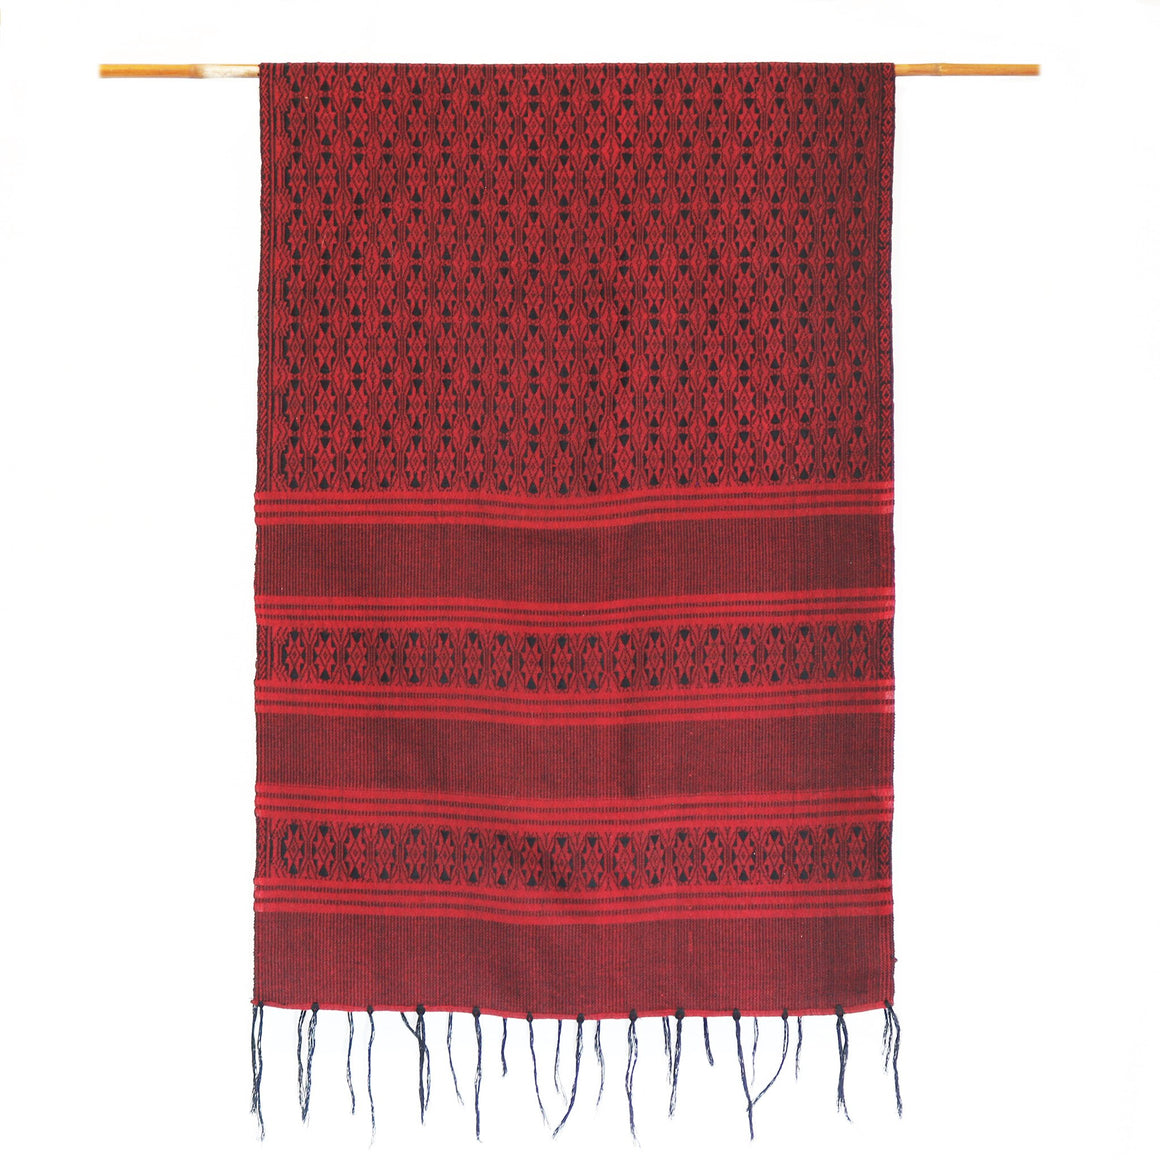 HAND-WOVEN COTTON LAOTIAN BLACK & MAROON WALL HANGING~TABLE RUNNER WALL HANGINGS ZENZOEY JEWELRY & ACCESSORIES 